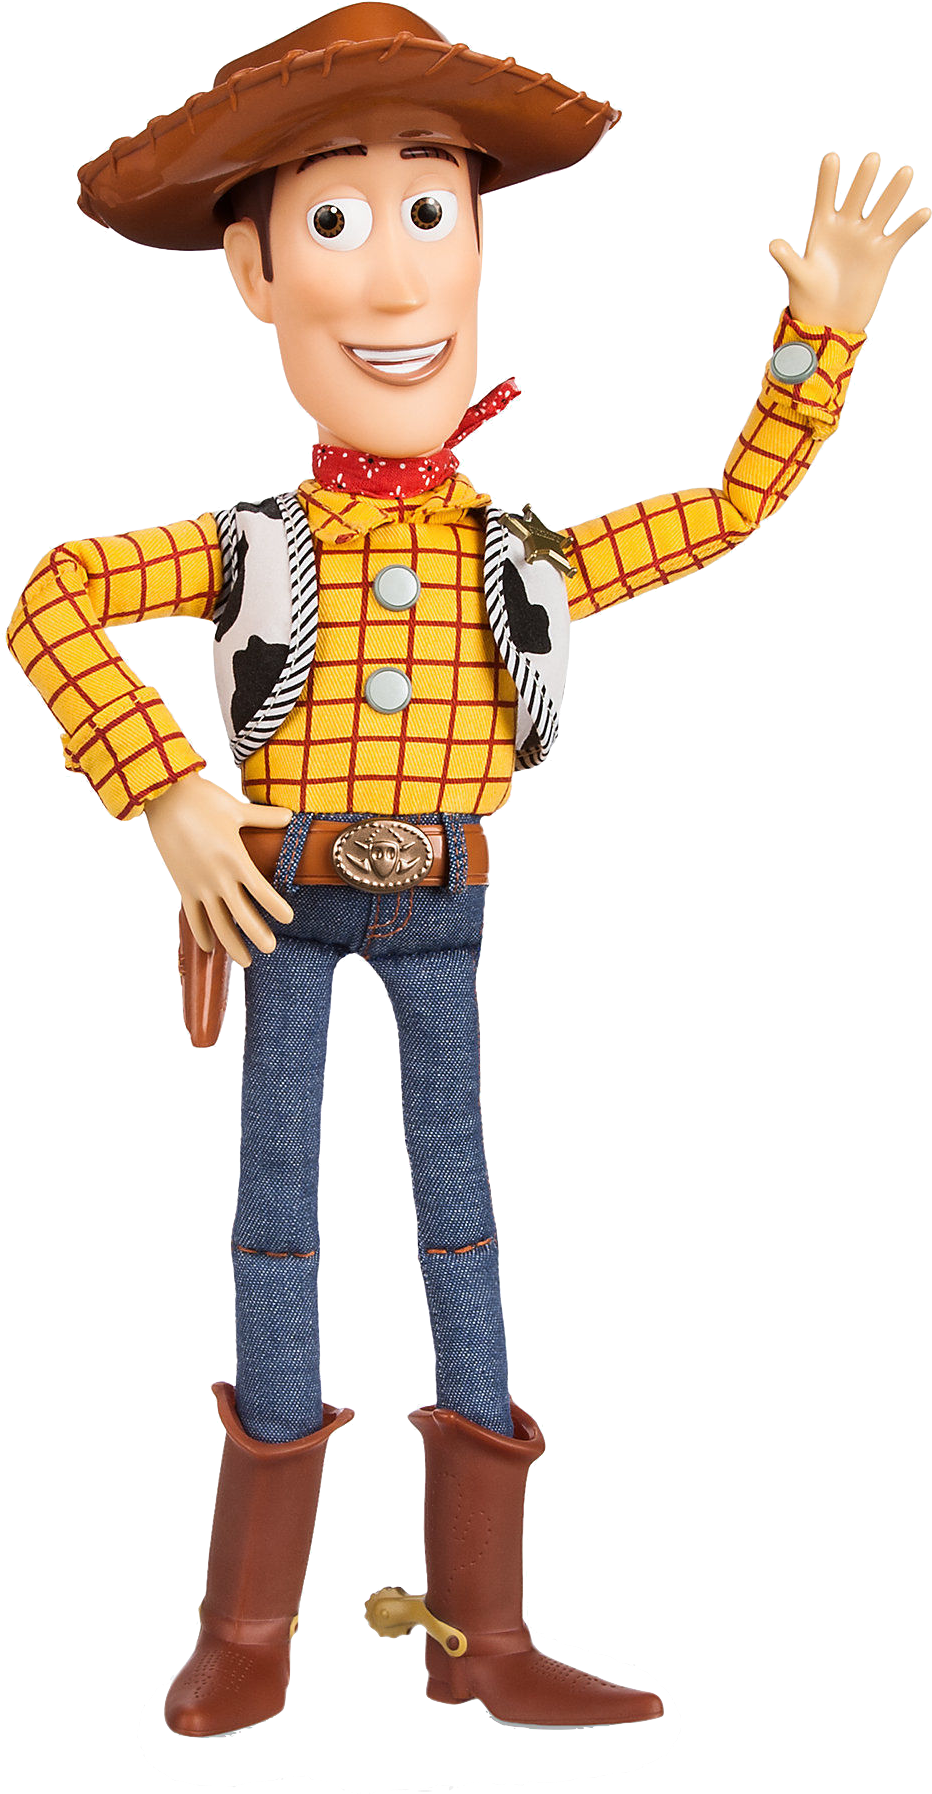 A Toy Cowboy With His Hand Up